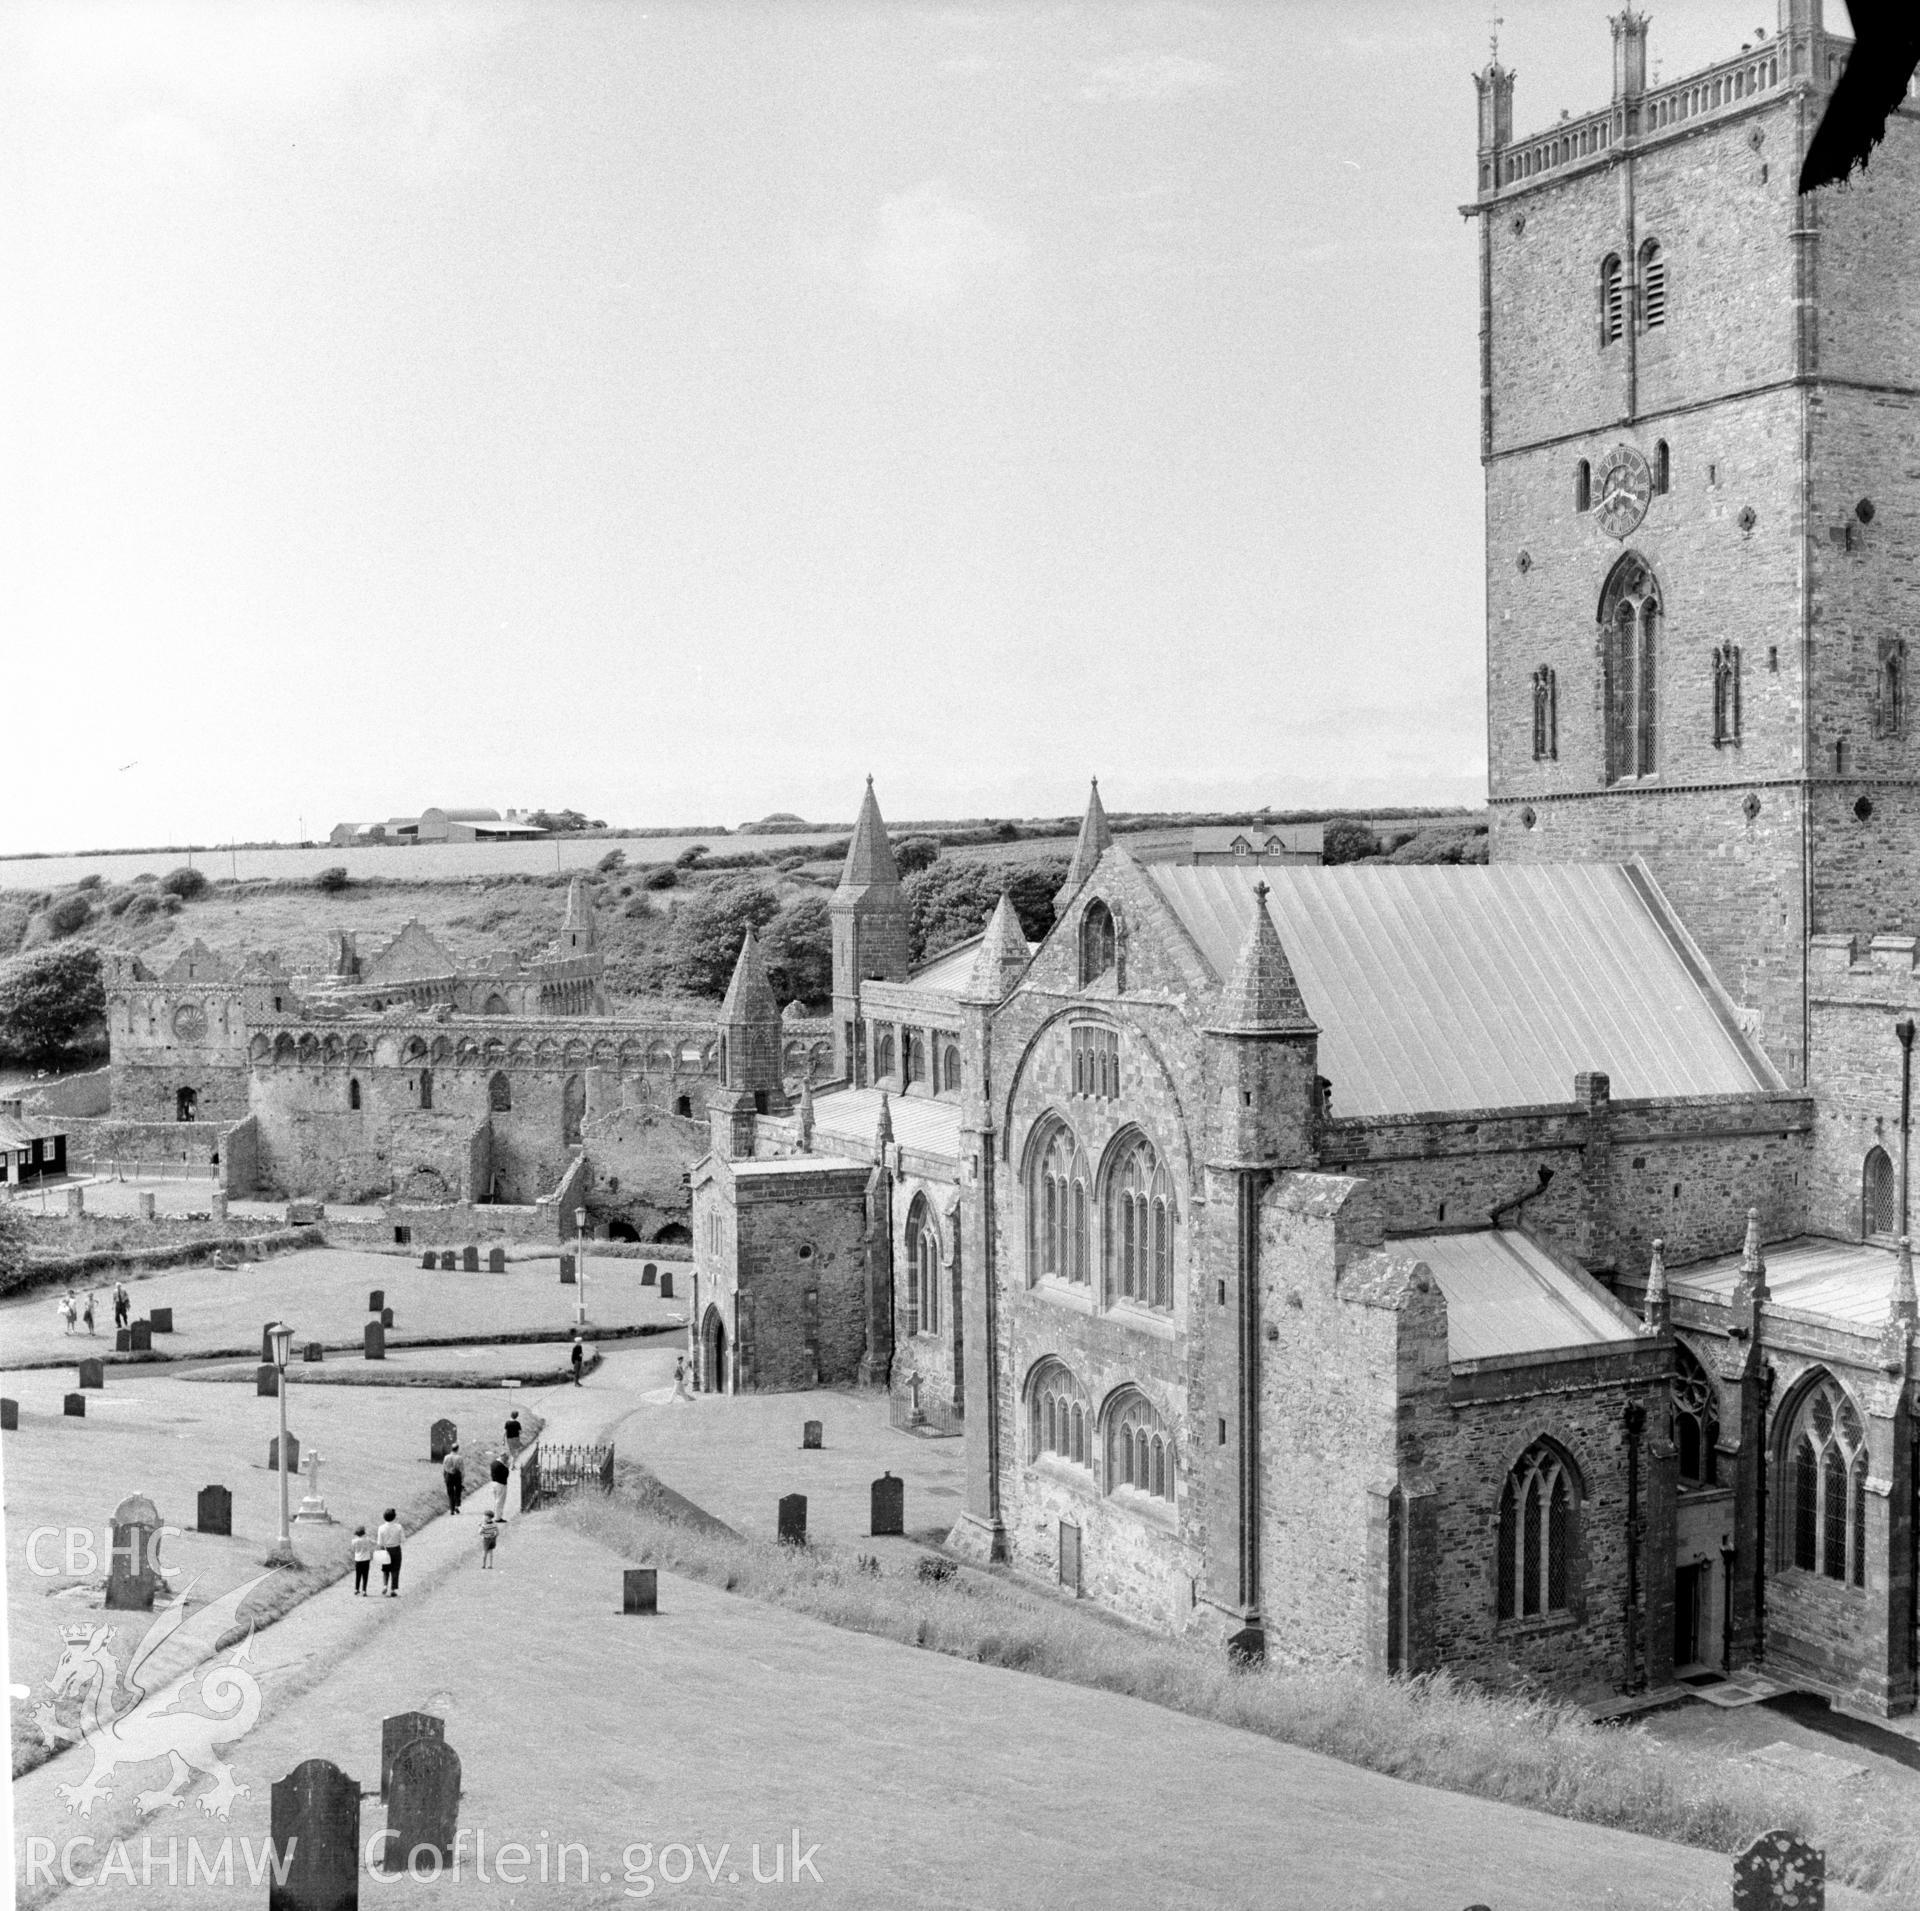 Digital copy of an acetate negative showing St Davids Cathedral, 13th September 1967.